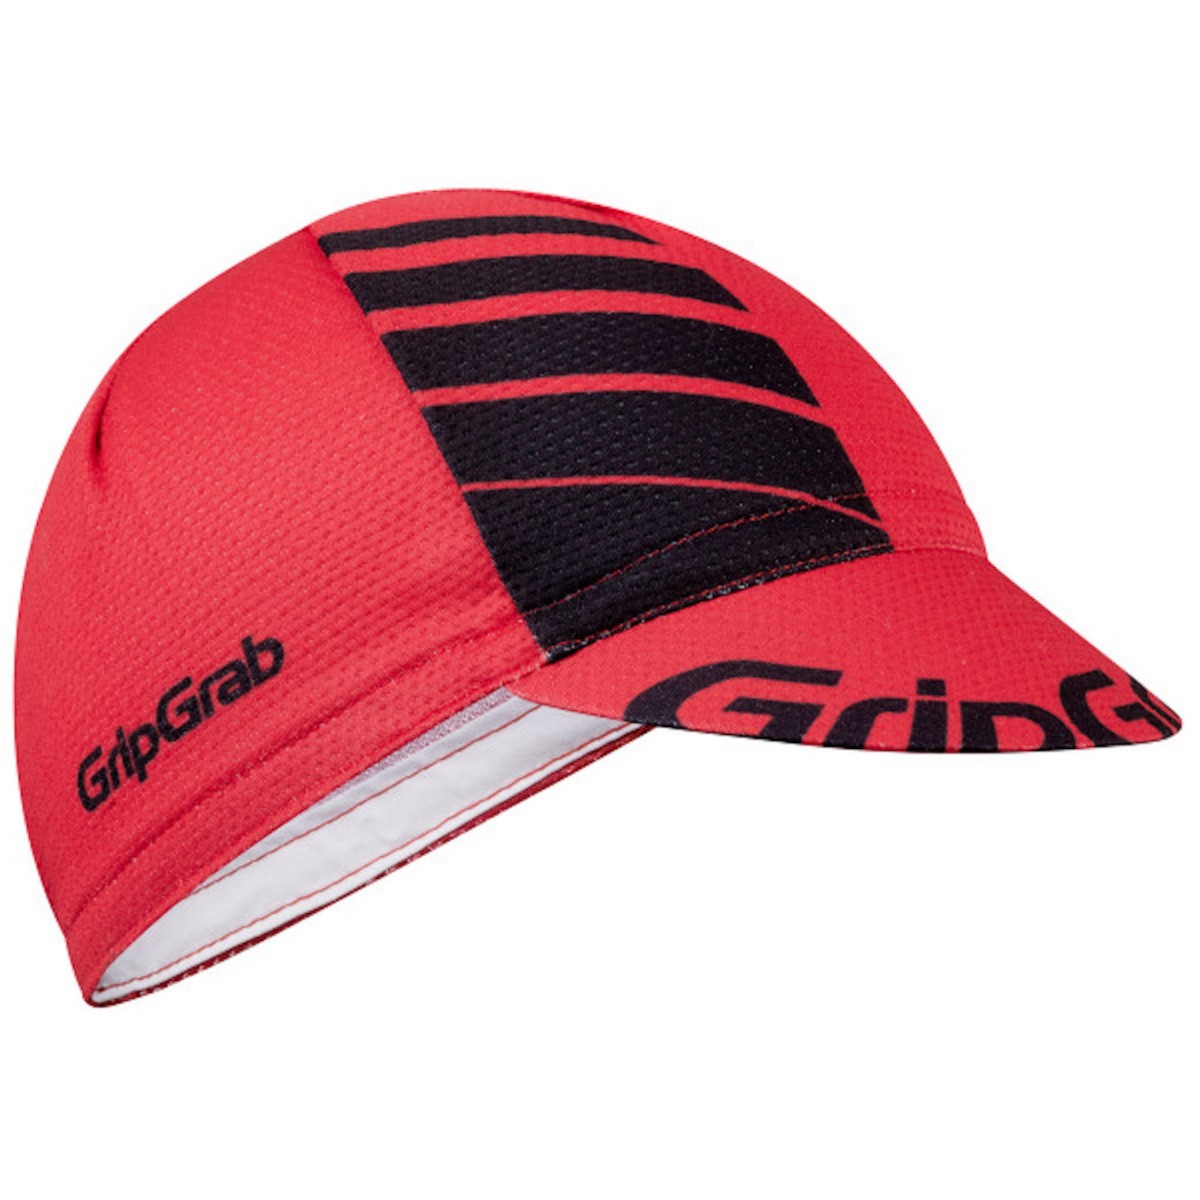 GRIPGRAB Lightweight Summer Cycling Cap cepure - red/black